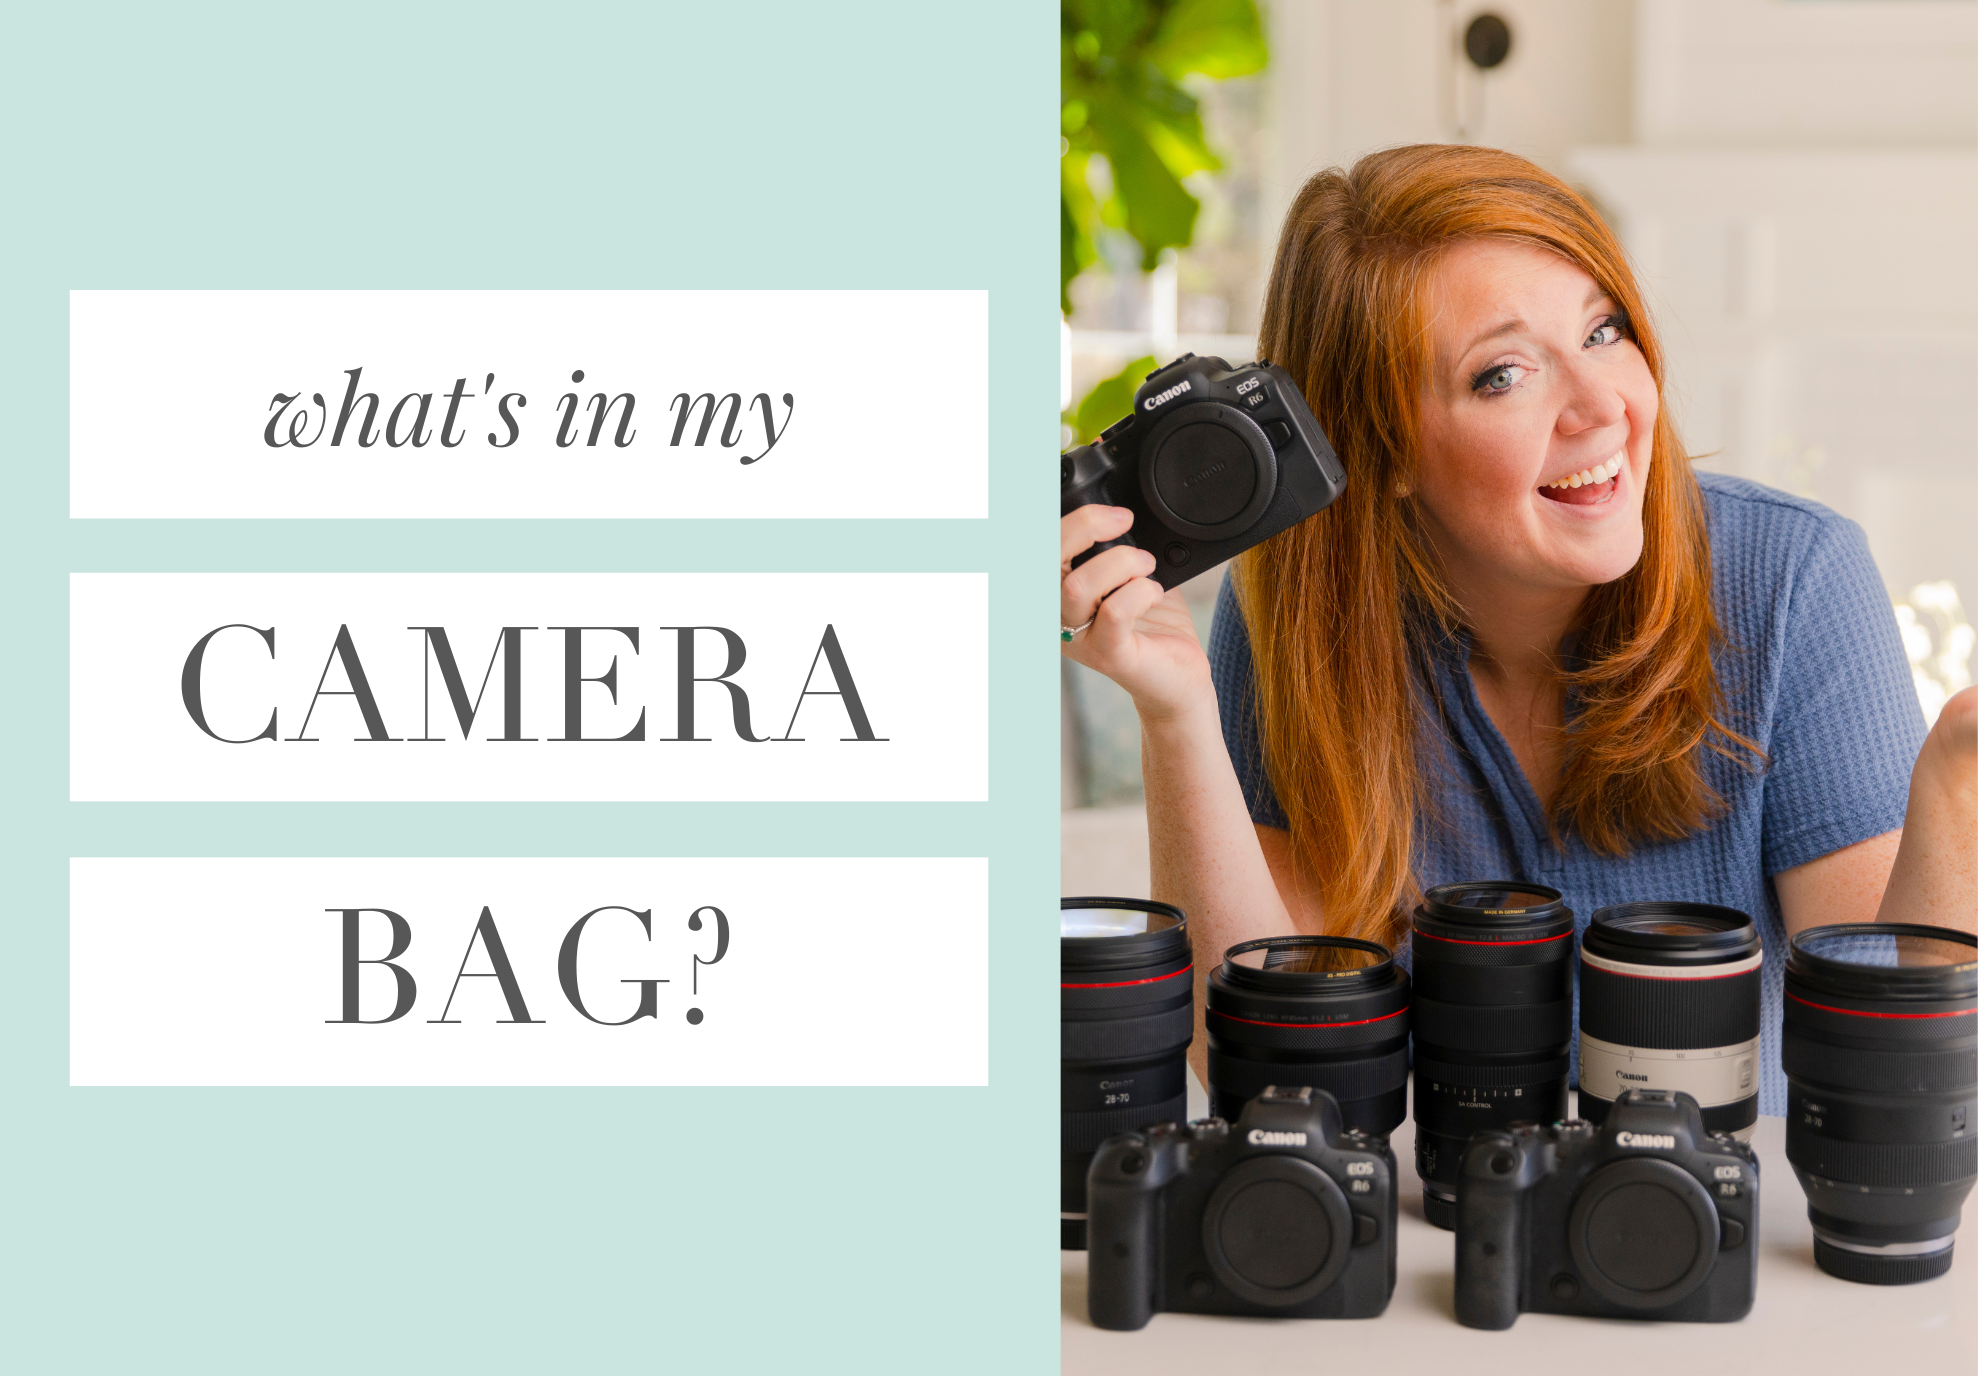 What's in My Camera Bag?